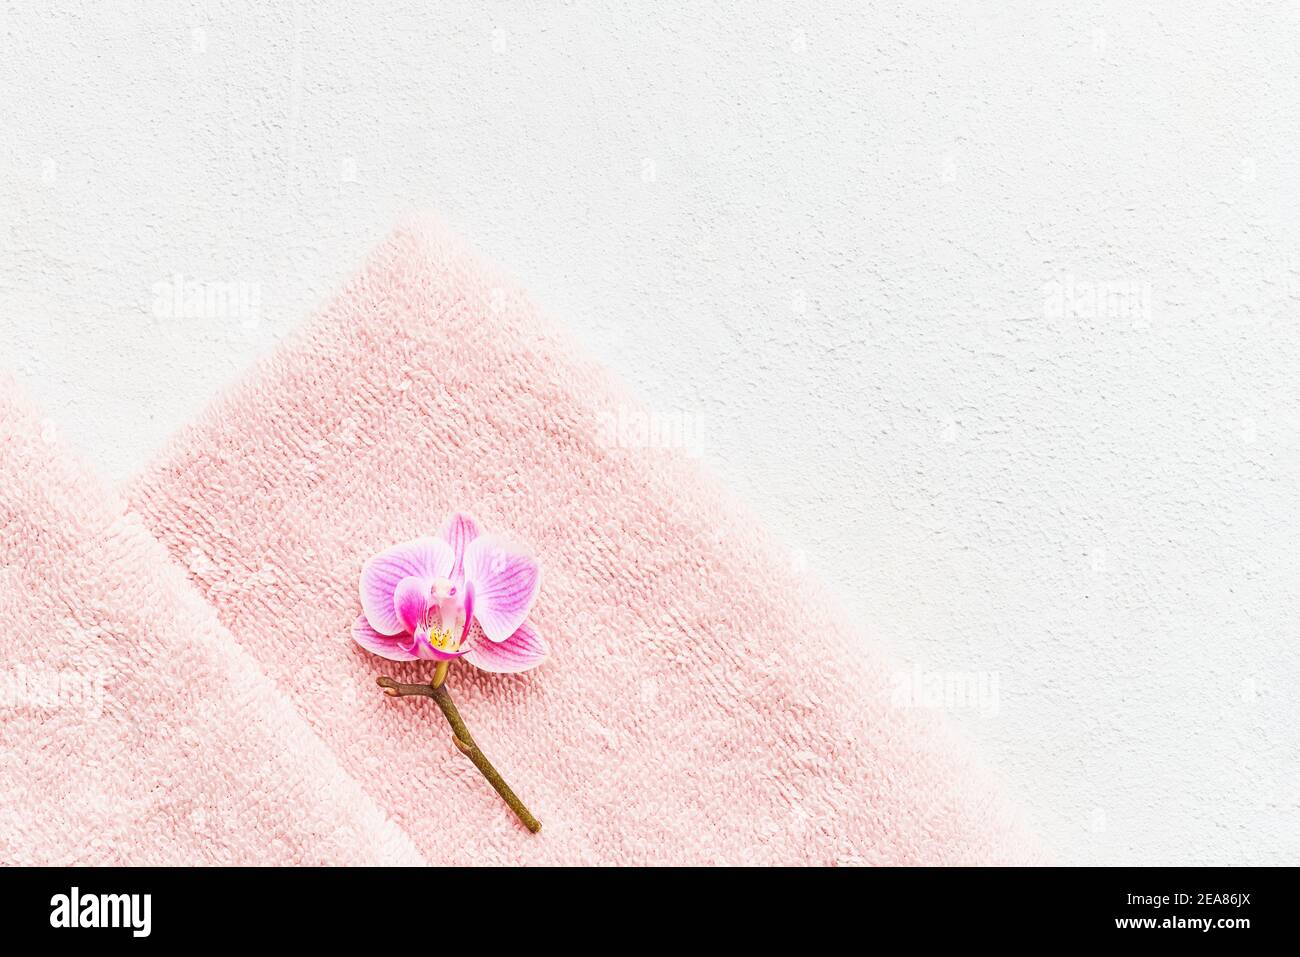 Rolled pink towel and orchid flower on white concrete background. Minimalist scandinavian style. SPA, hygiene, wellness well-being, body care concept. Stock Photo